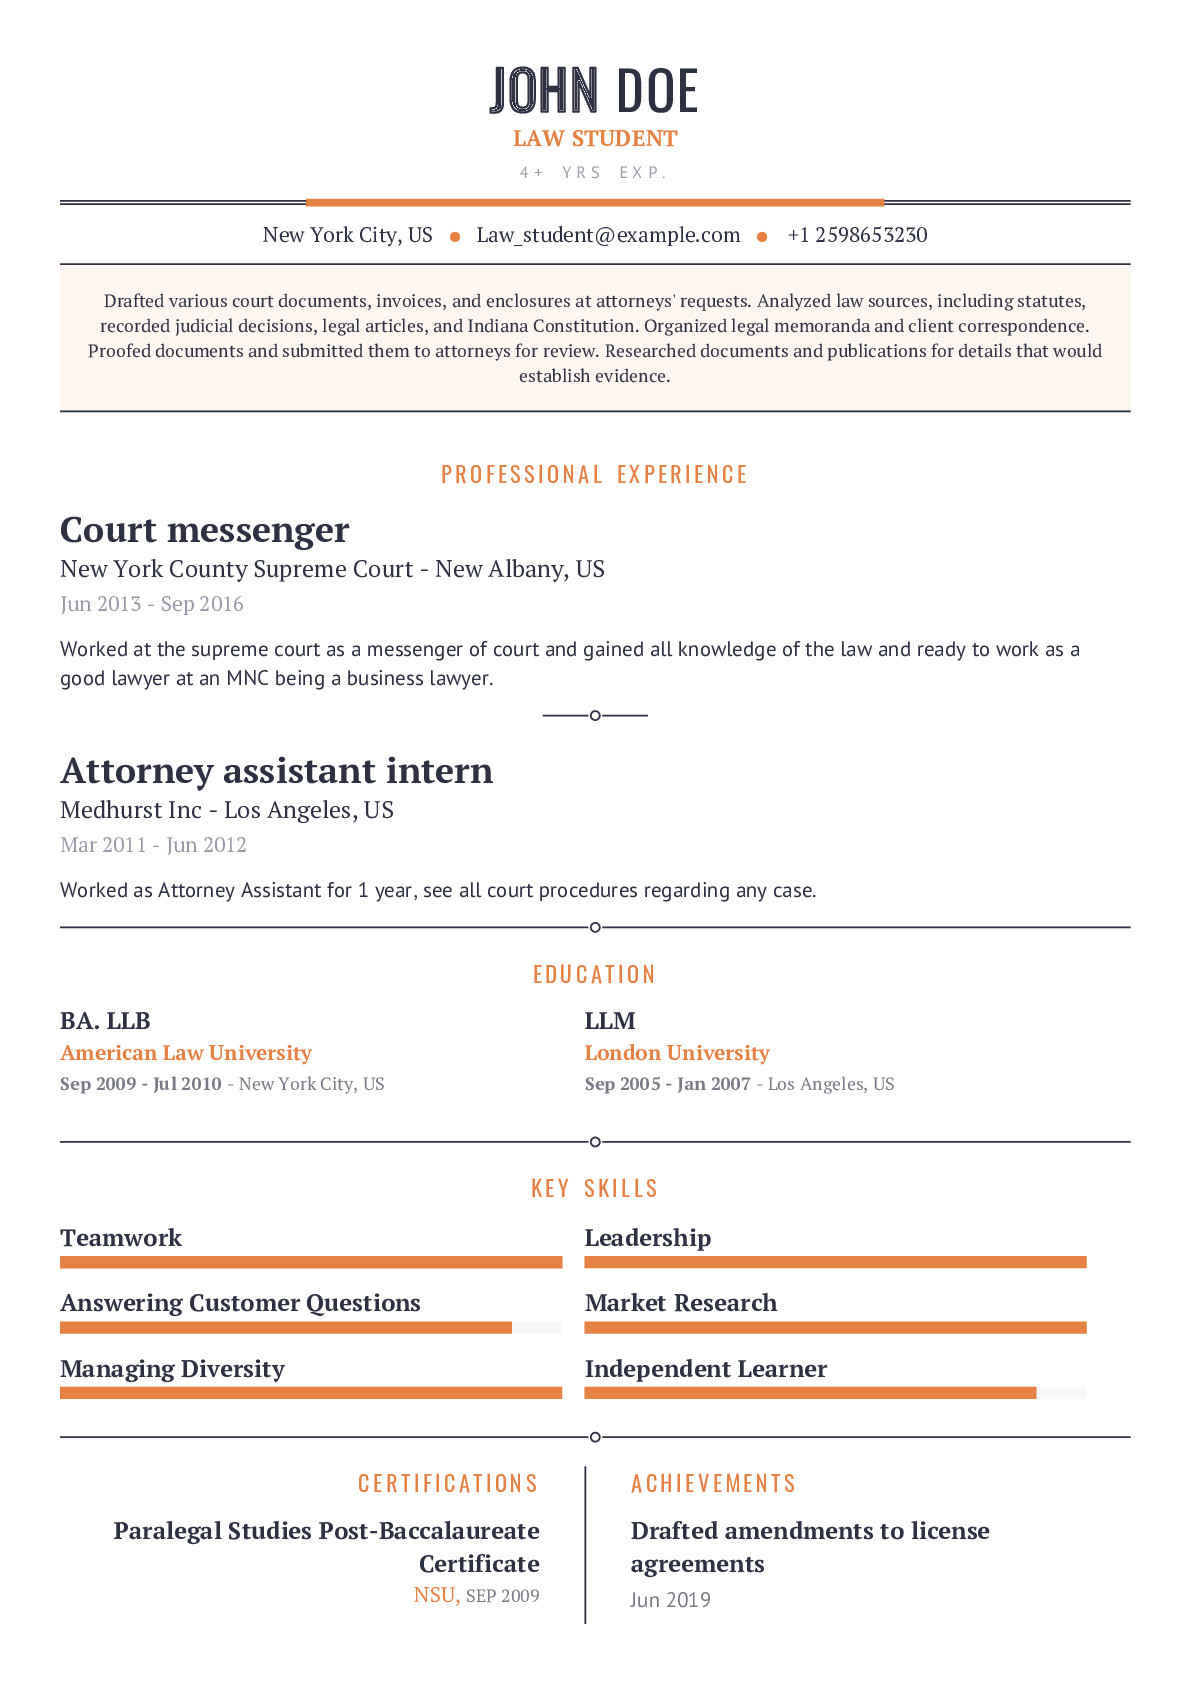 Sample Resume for County Court Clerk Law Student Resume Example with Content Sample Craftmycv